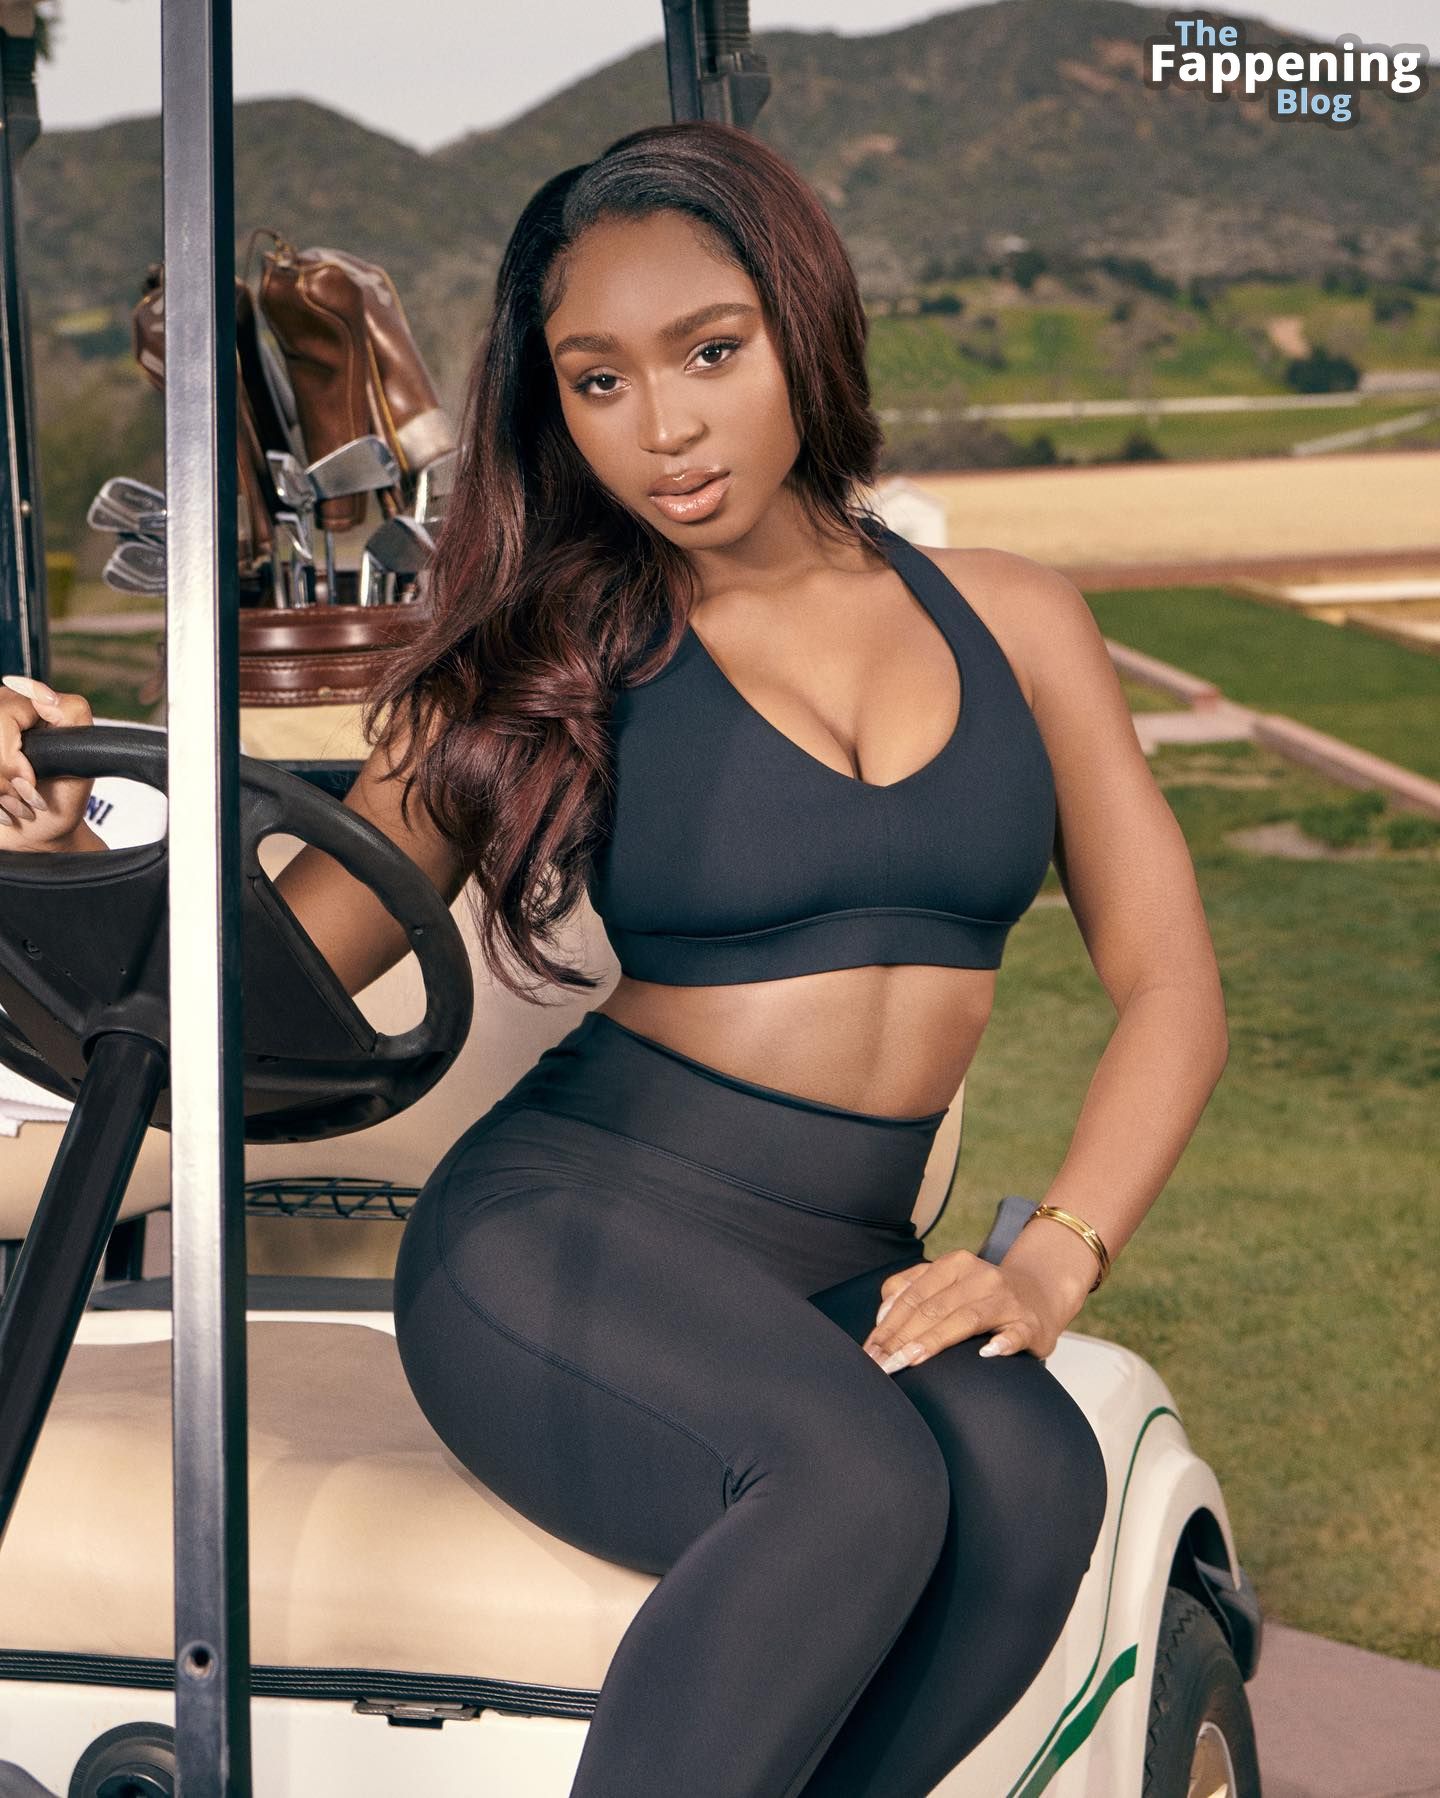 Normani-Sexy-The-Fappening-Blog-4.jpg